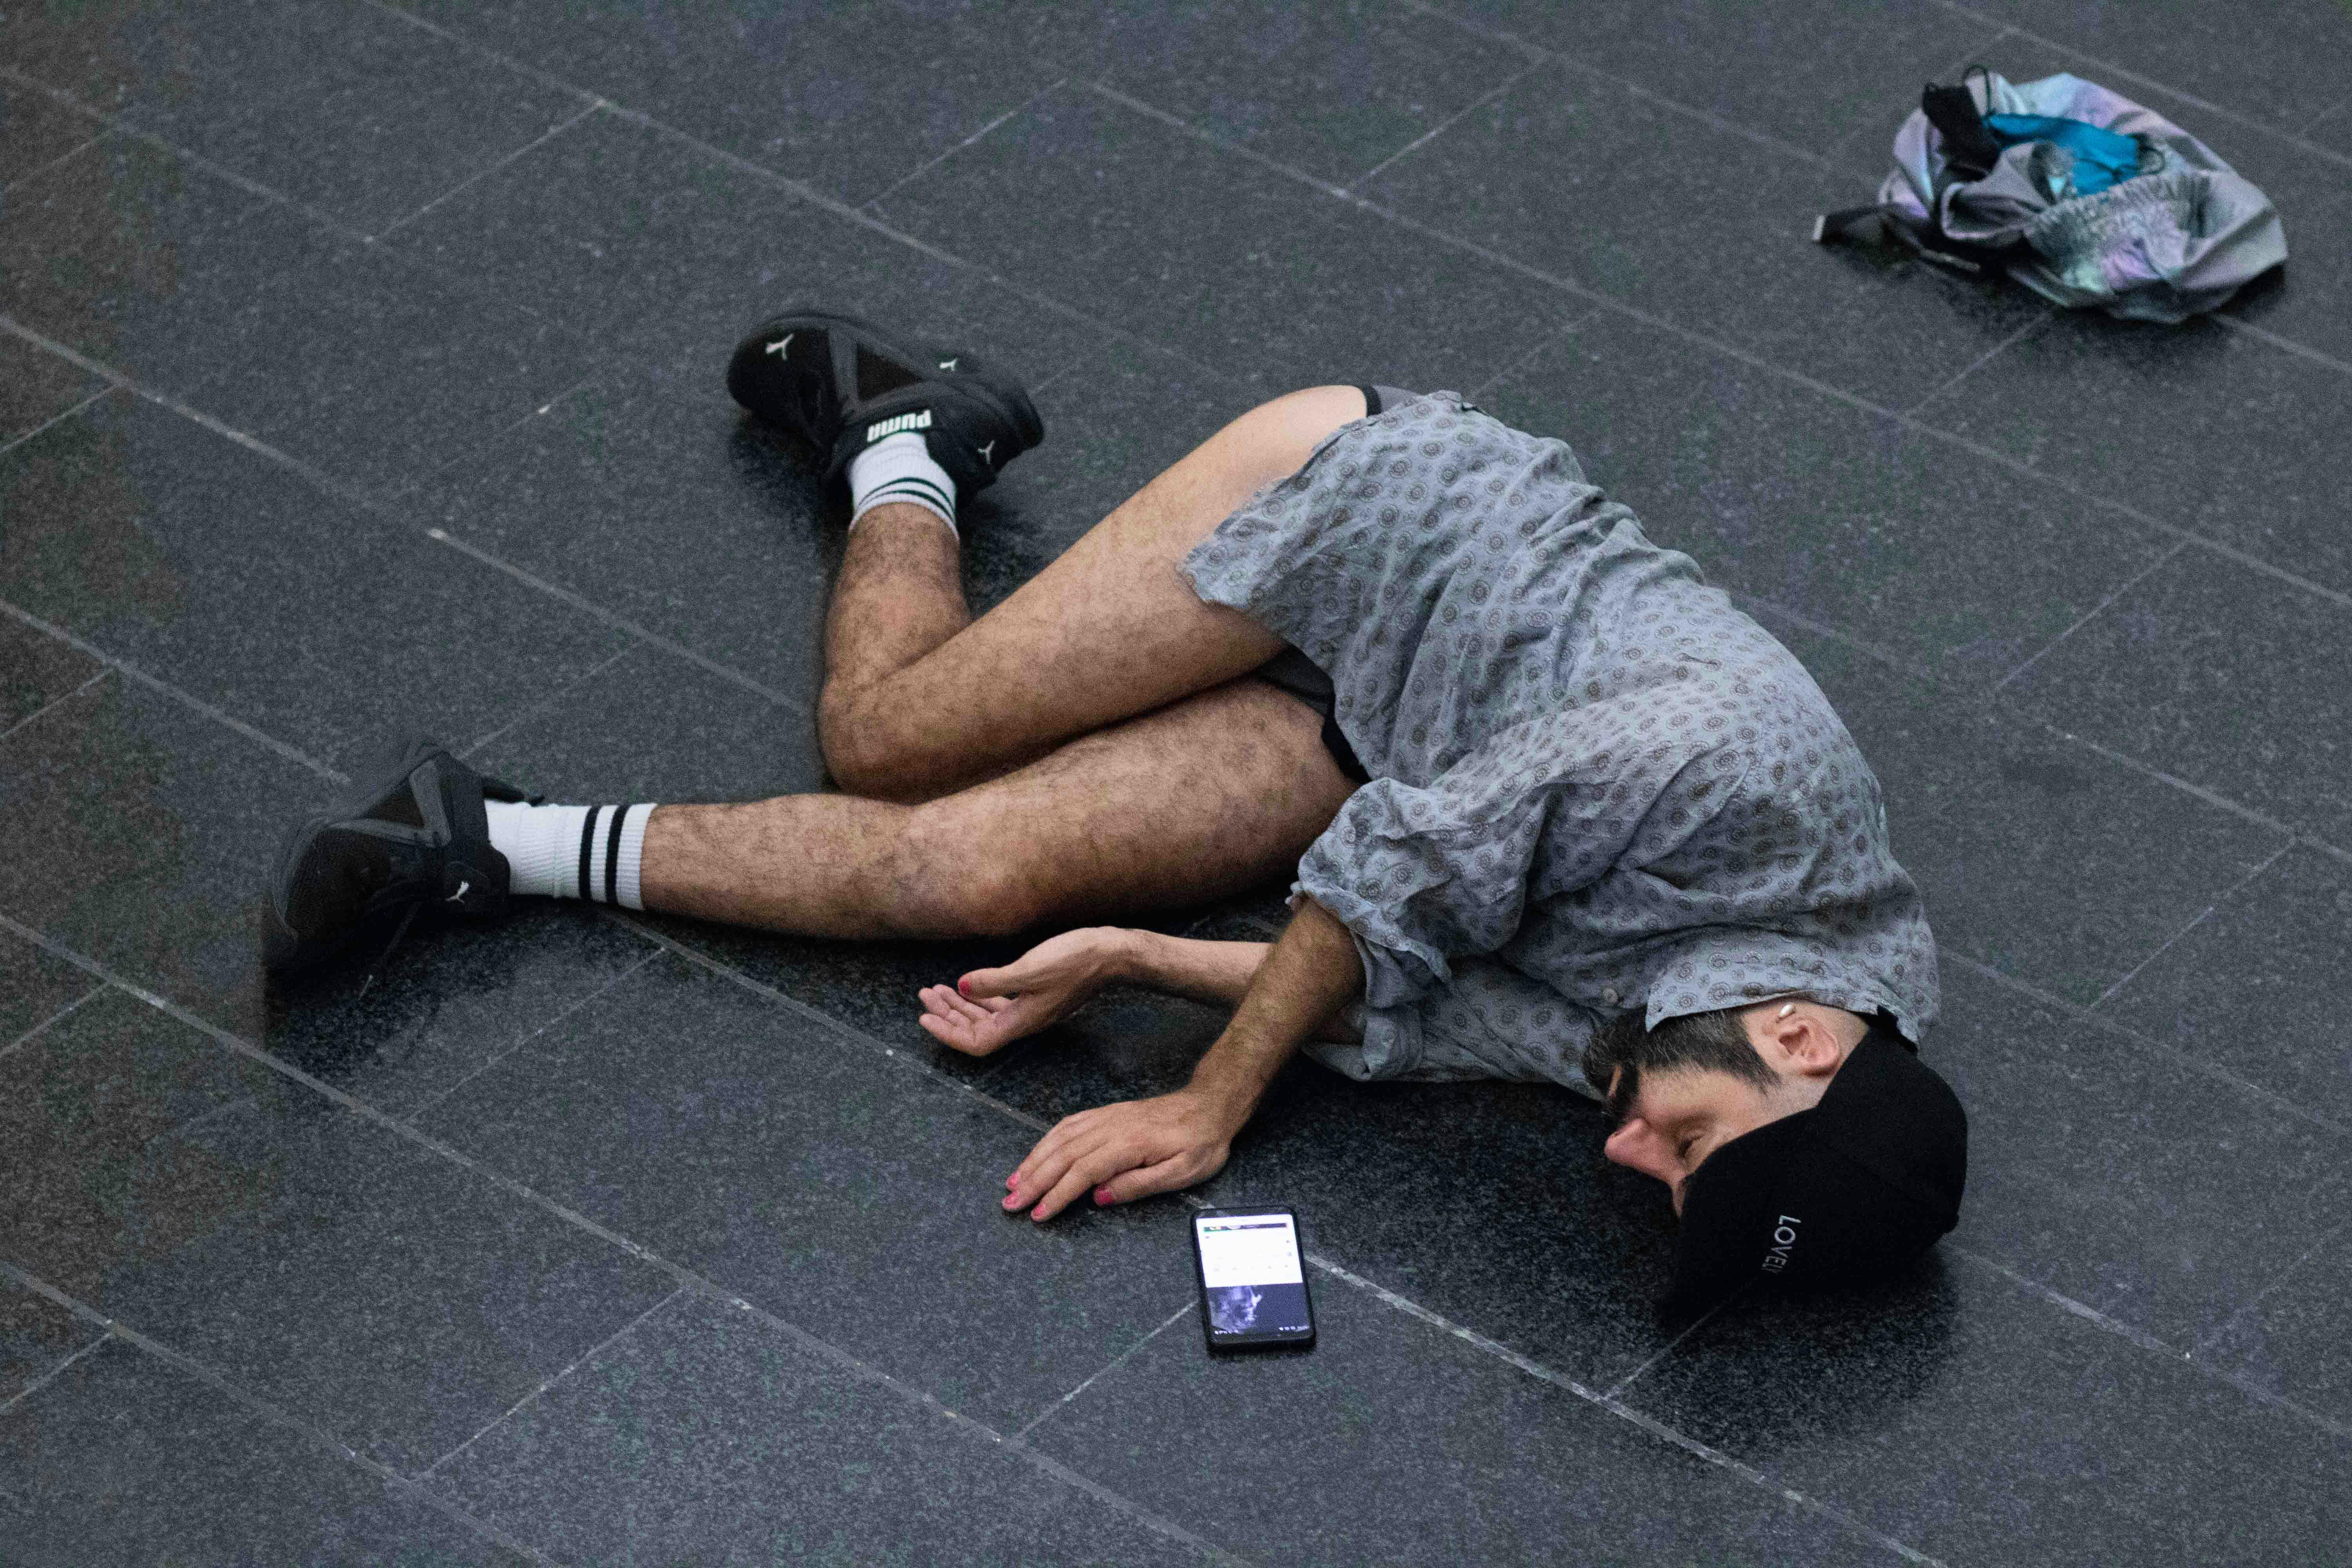 Daniele Ninarello lying in the fetal position with a smartphone at his side